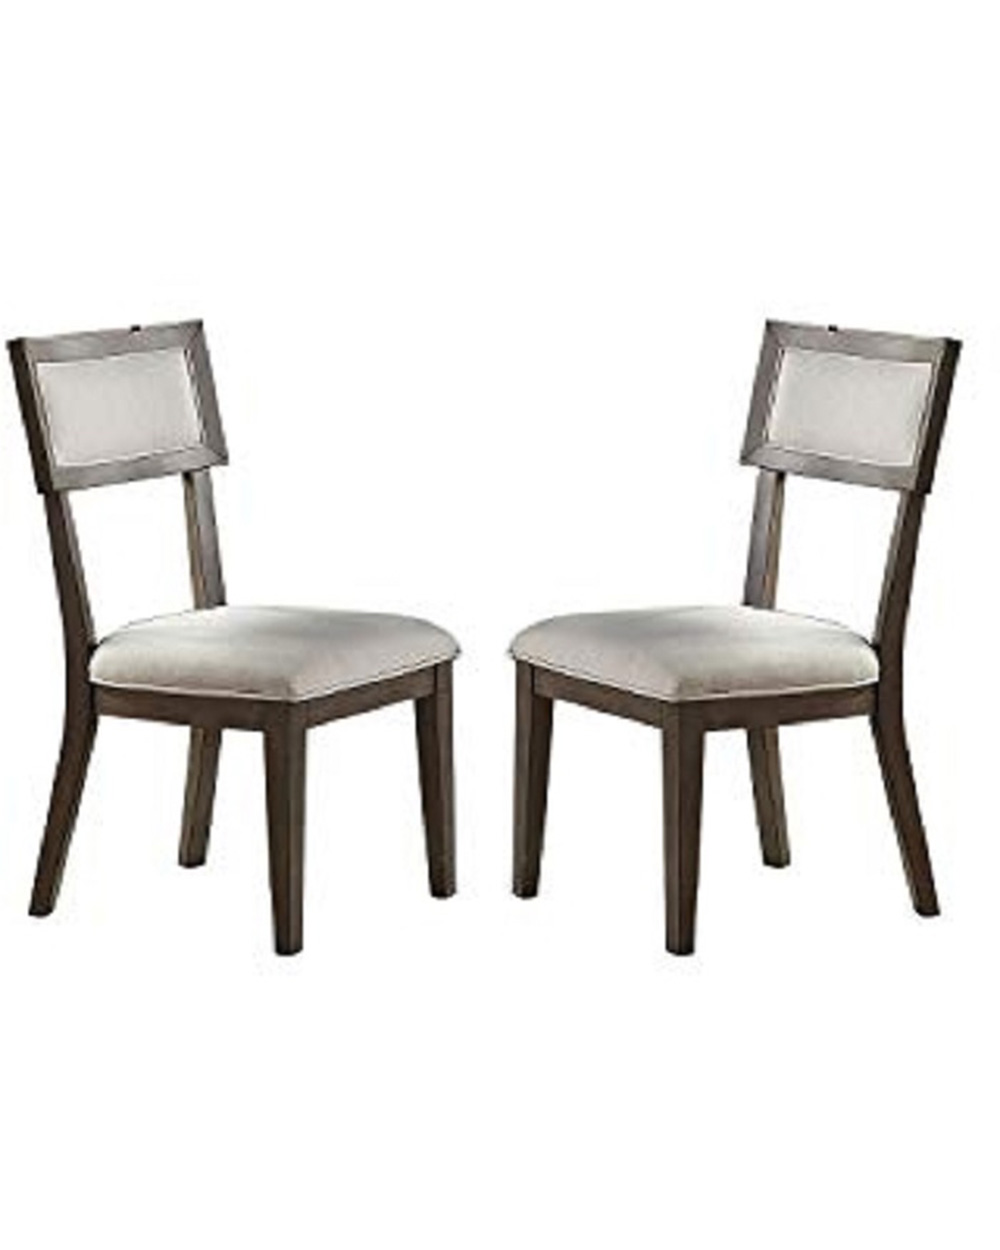 Upholstered Dining Chair Set of 2, with Backrest, and Wood Legs, for Restaurant, Cafe, Tavern, Office, Living Room - Gray